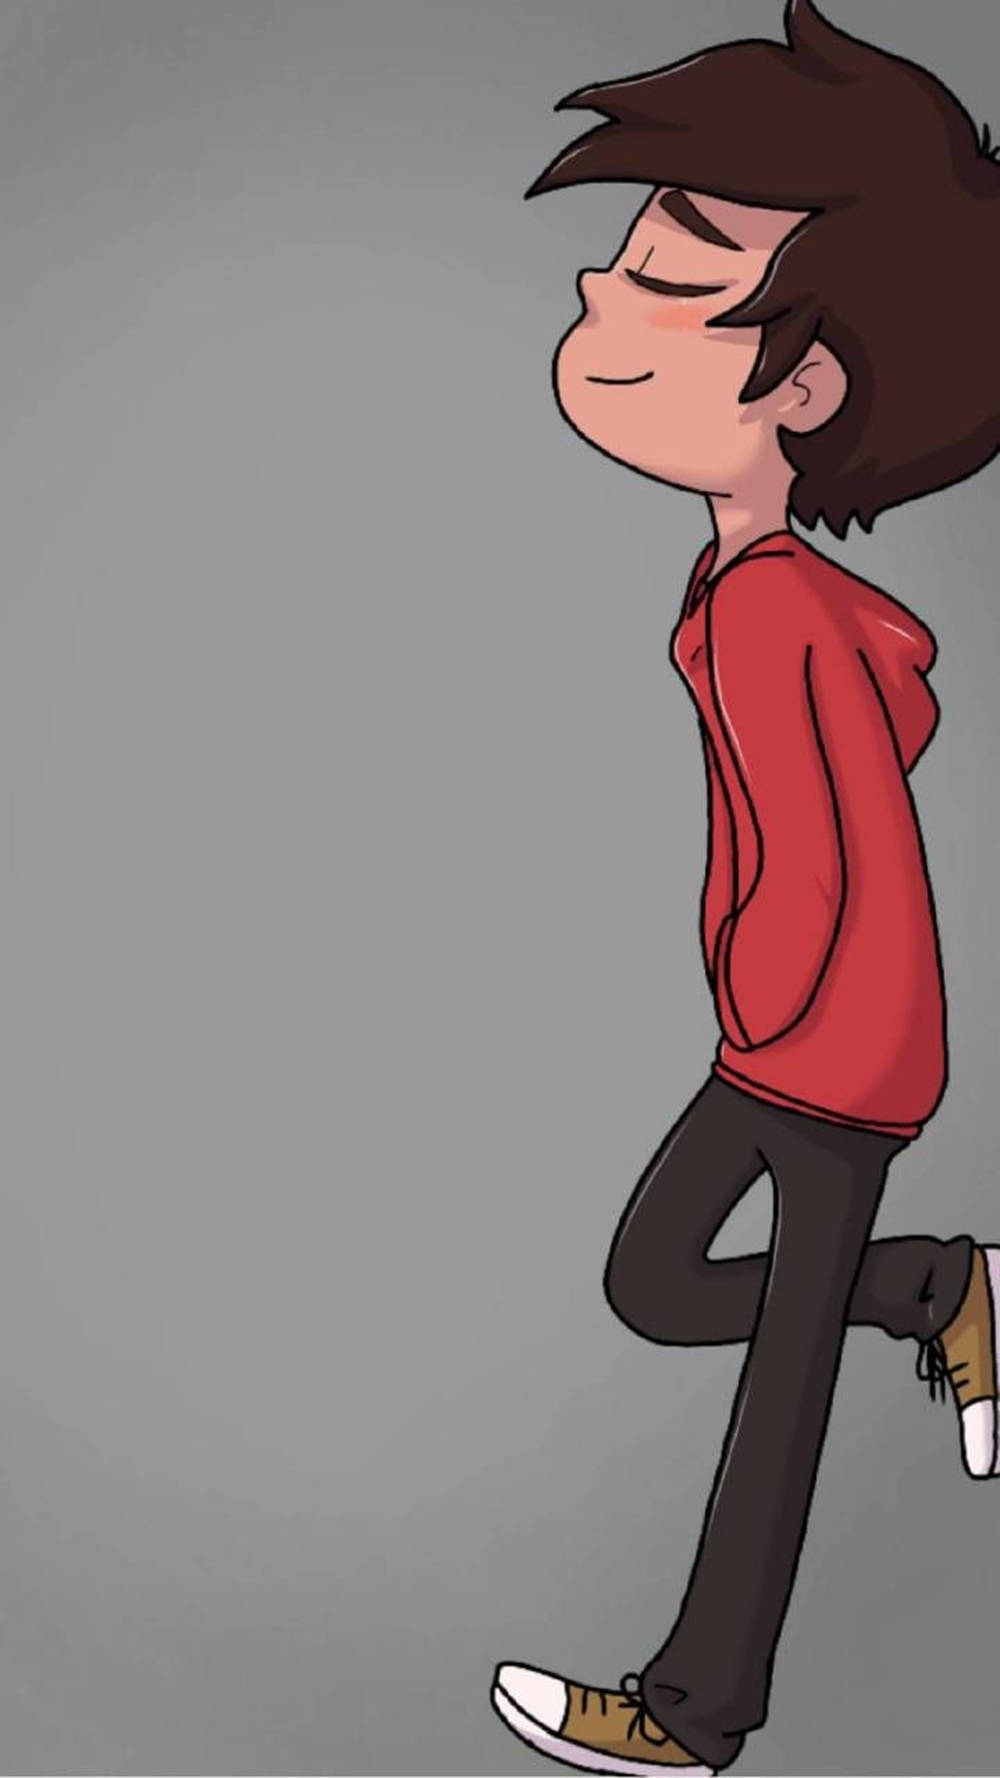 Caption: Cool Marco, The Cute Boy Cartoon Leaning On A Wall Wallpaper